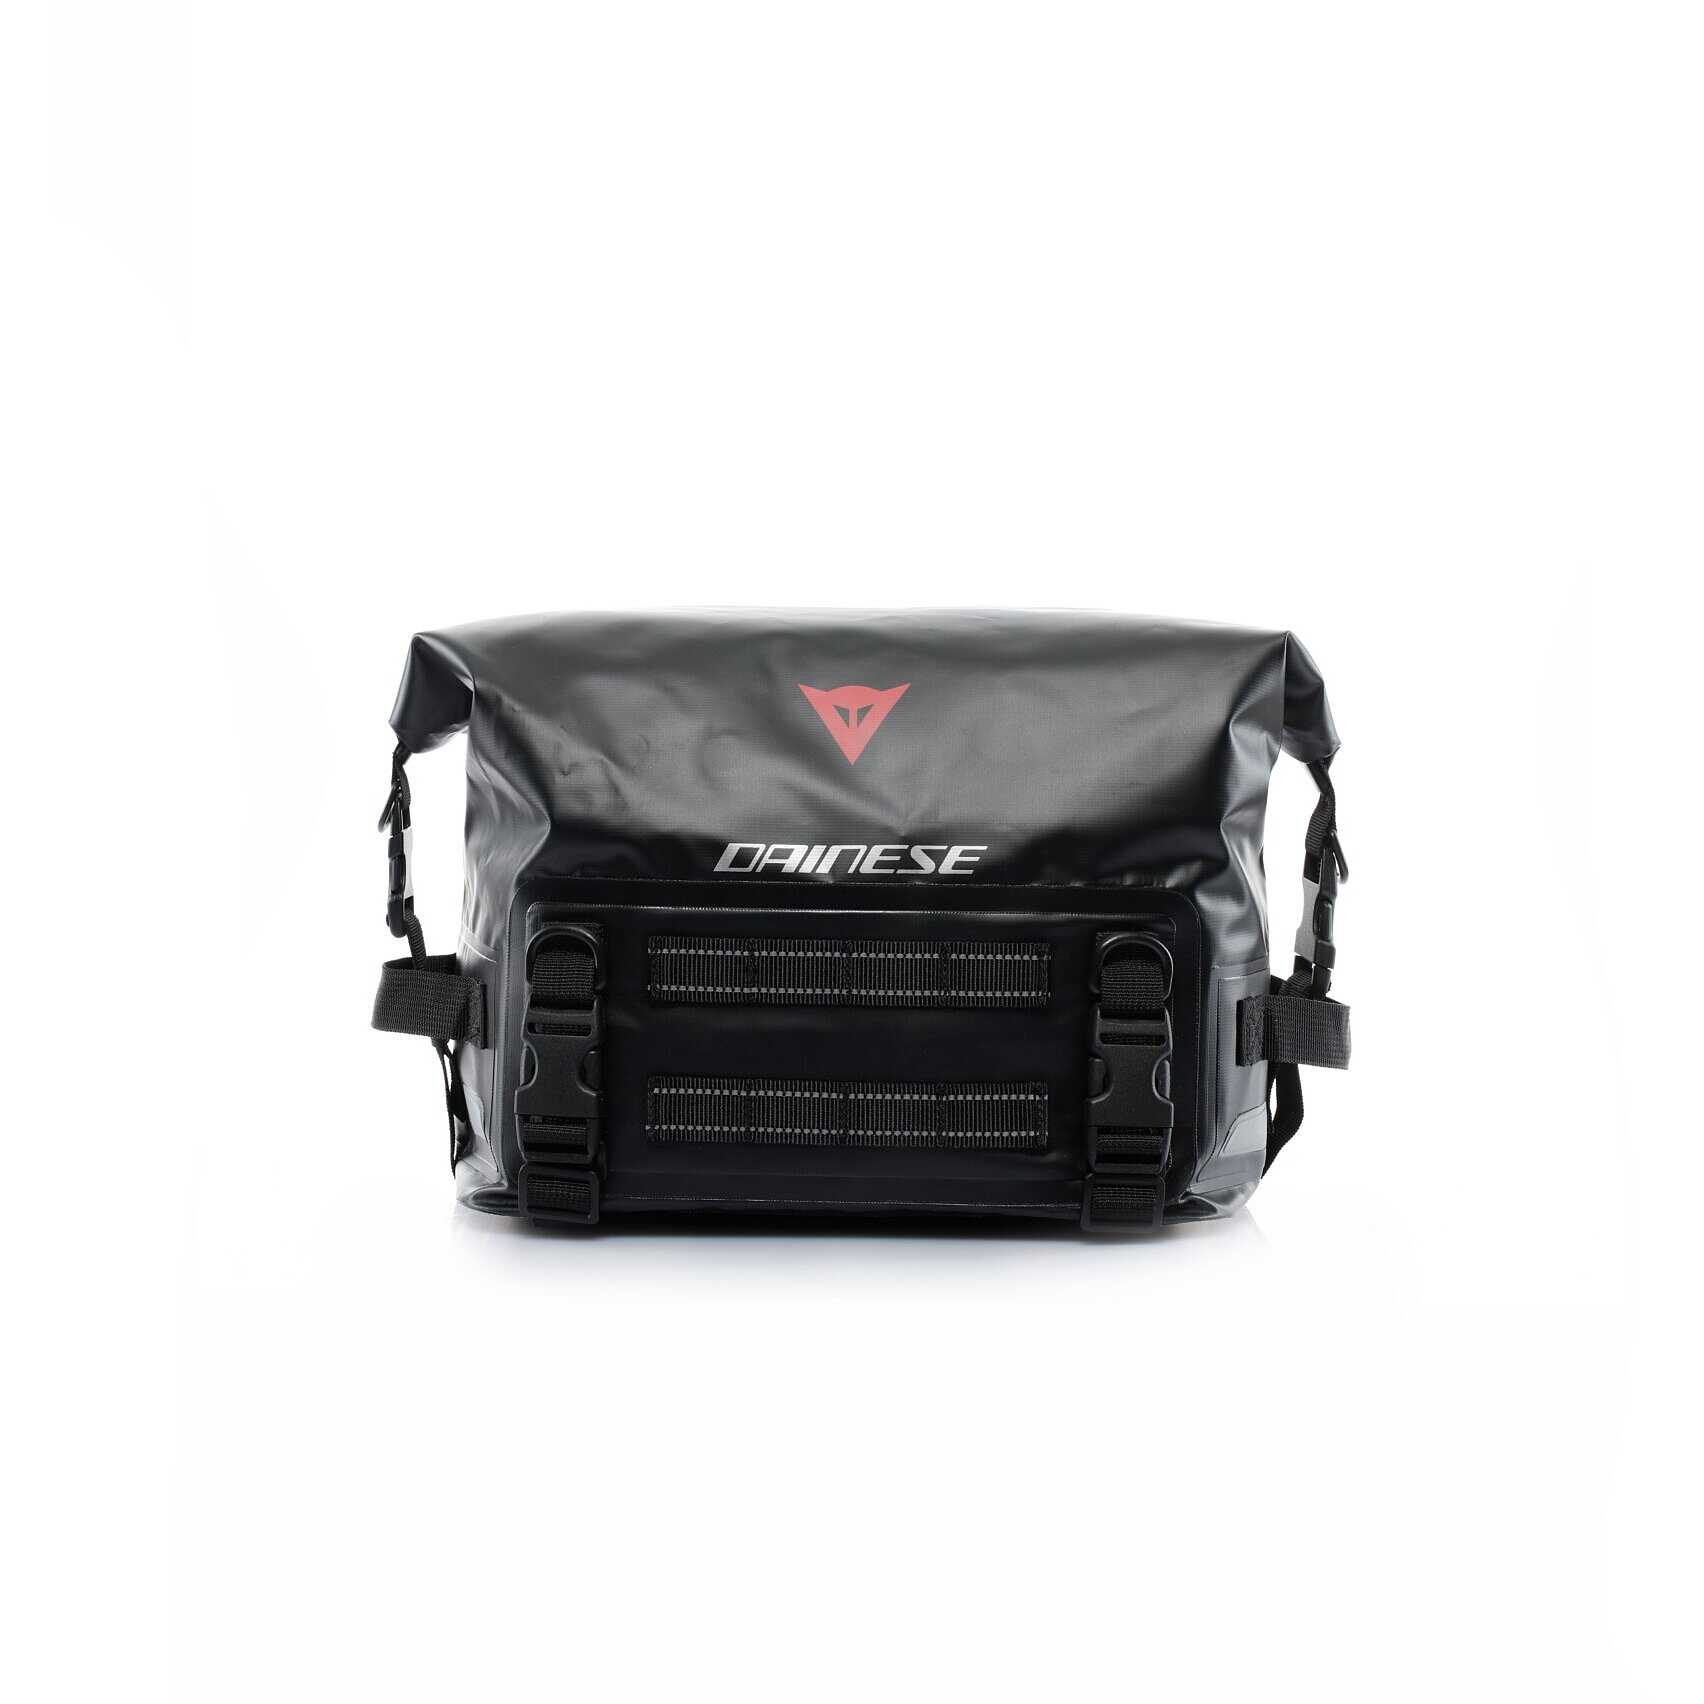 Dainese D-Cabin Travel Bag - Buy now, get 11% off | XLMOTO